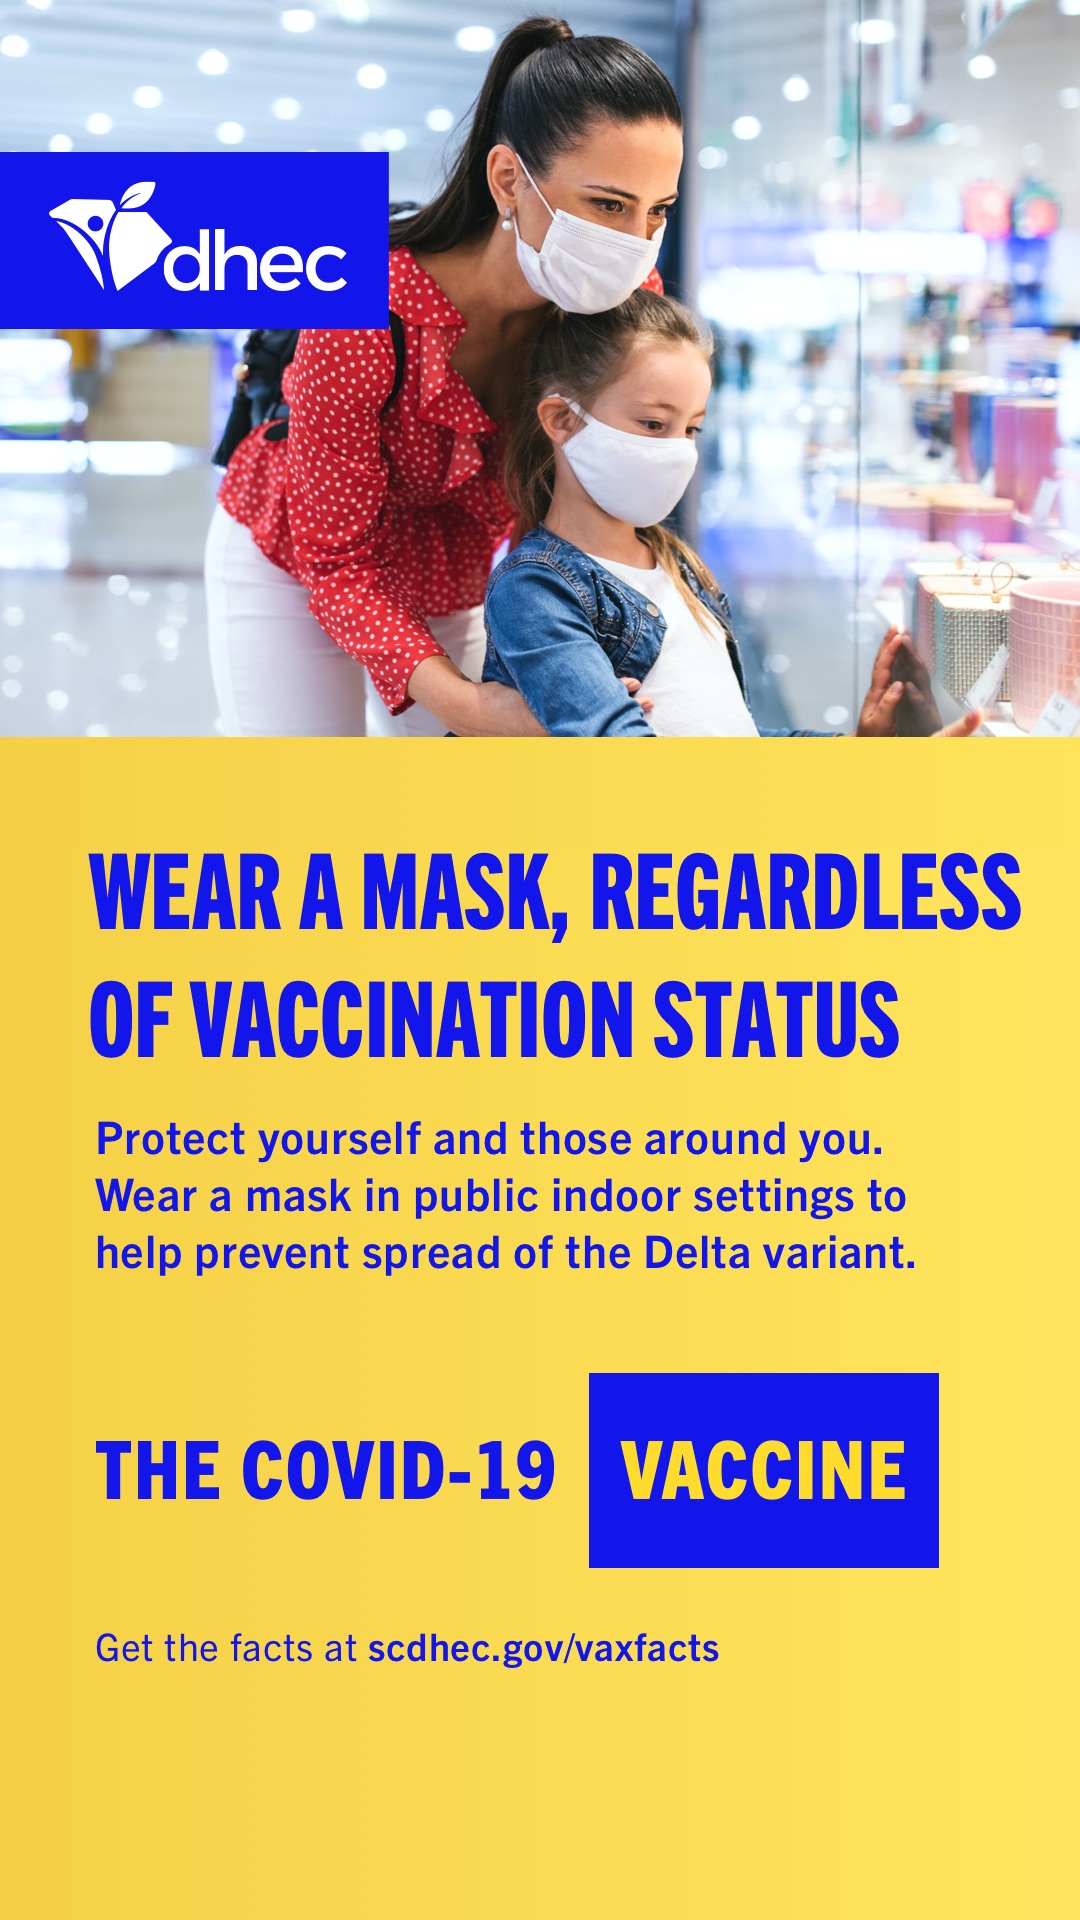 Wear a mask, regardless of vaccination status